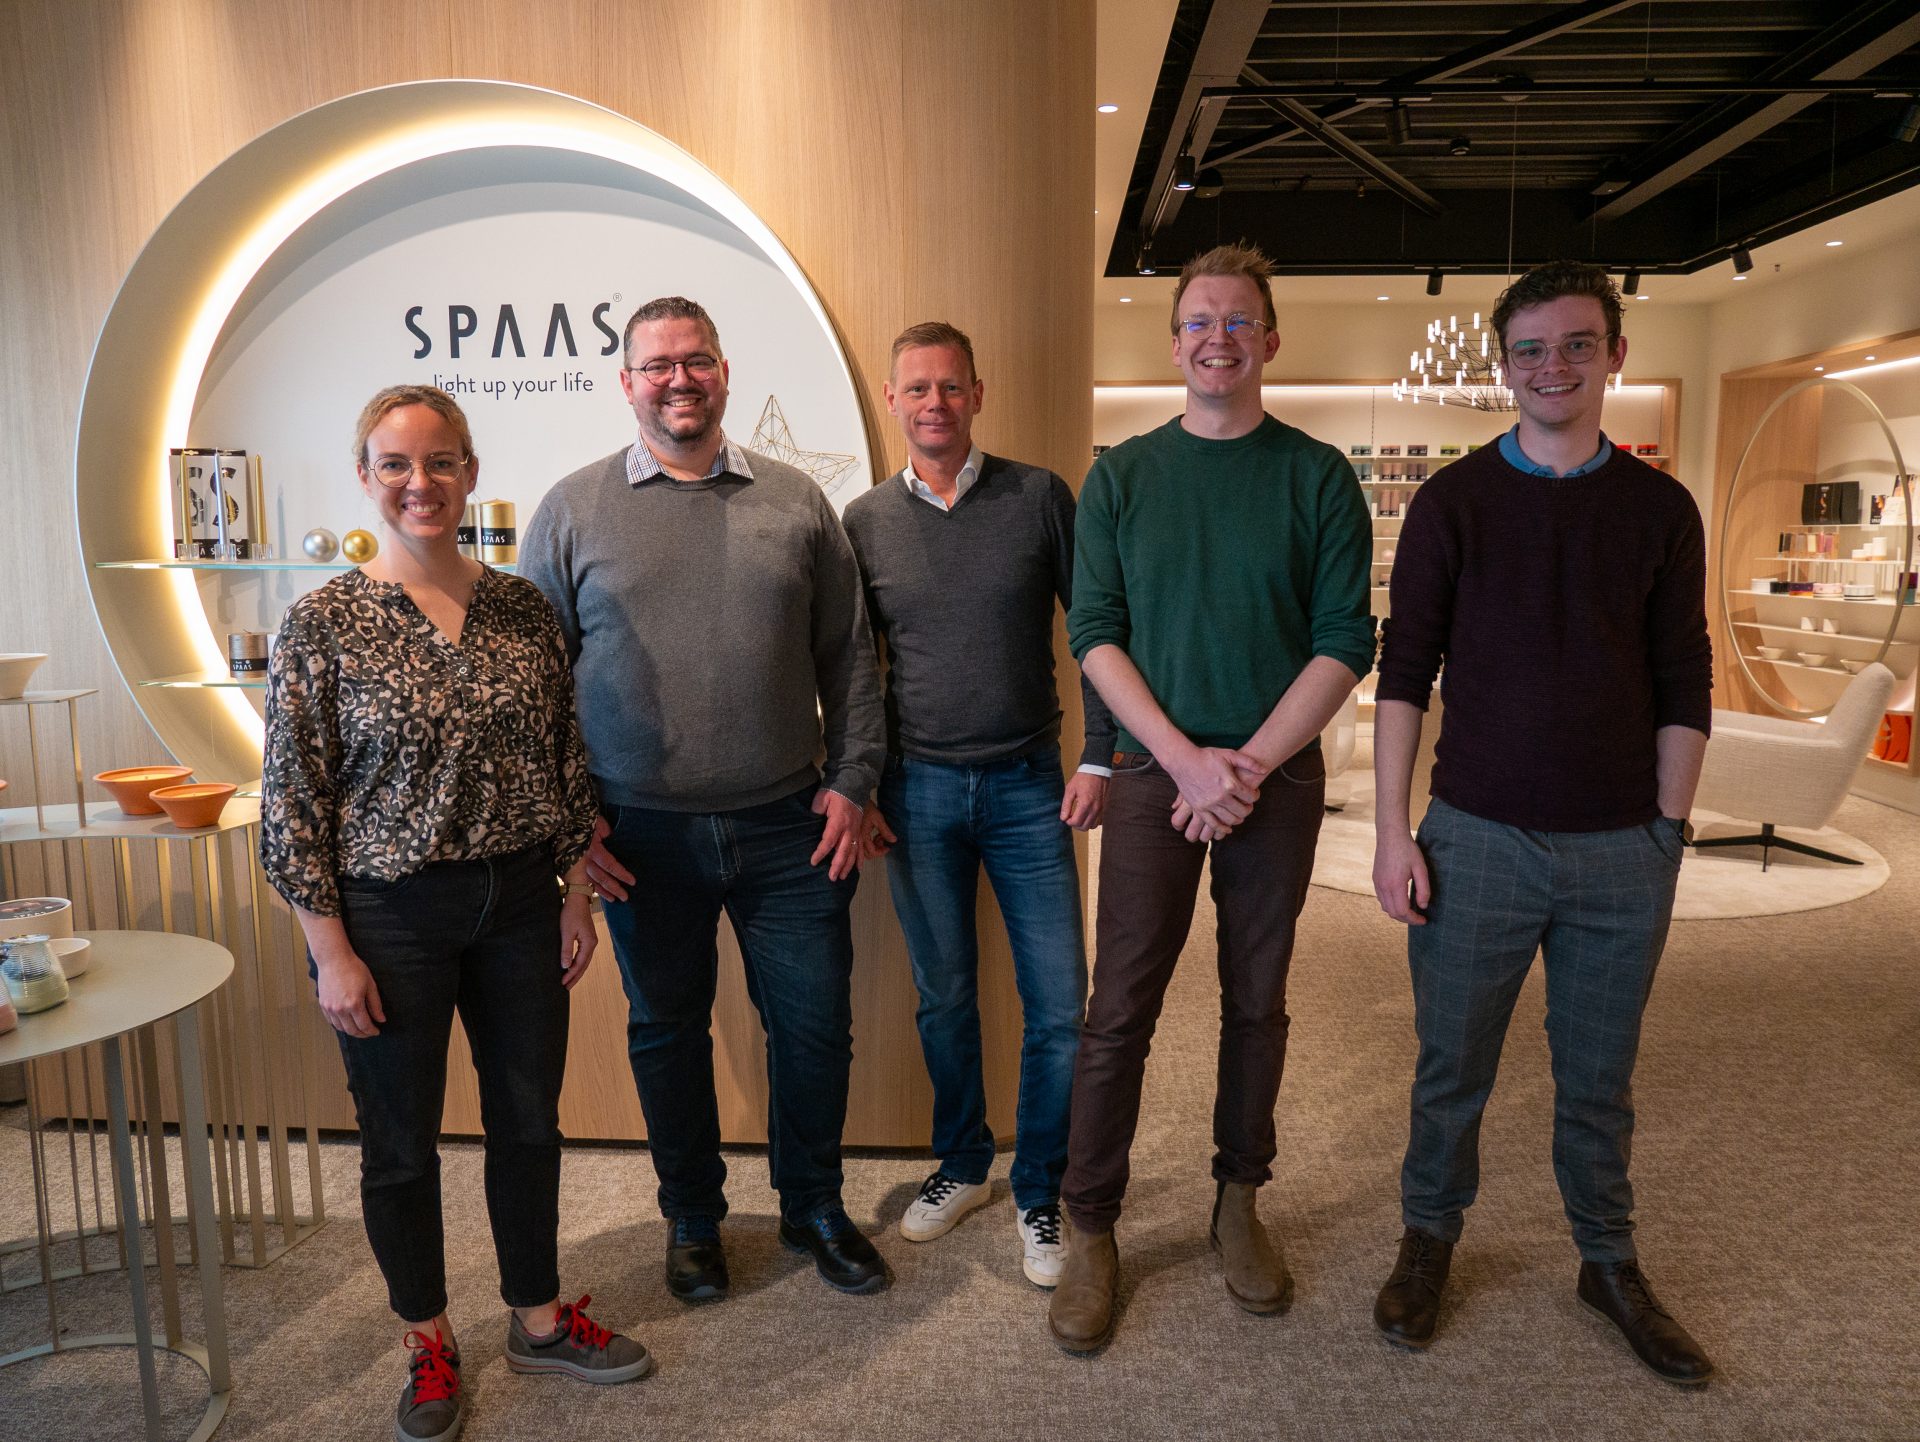 The IT teams of Spaas and Syntory posing for a picture in the Spaas showroom